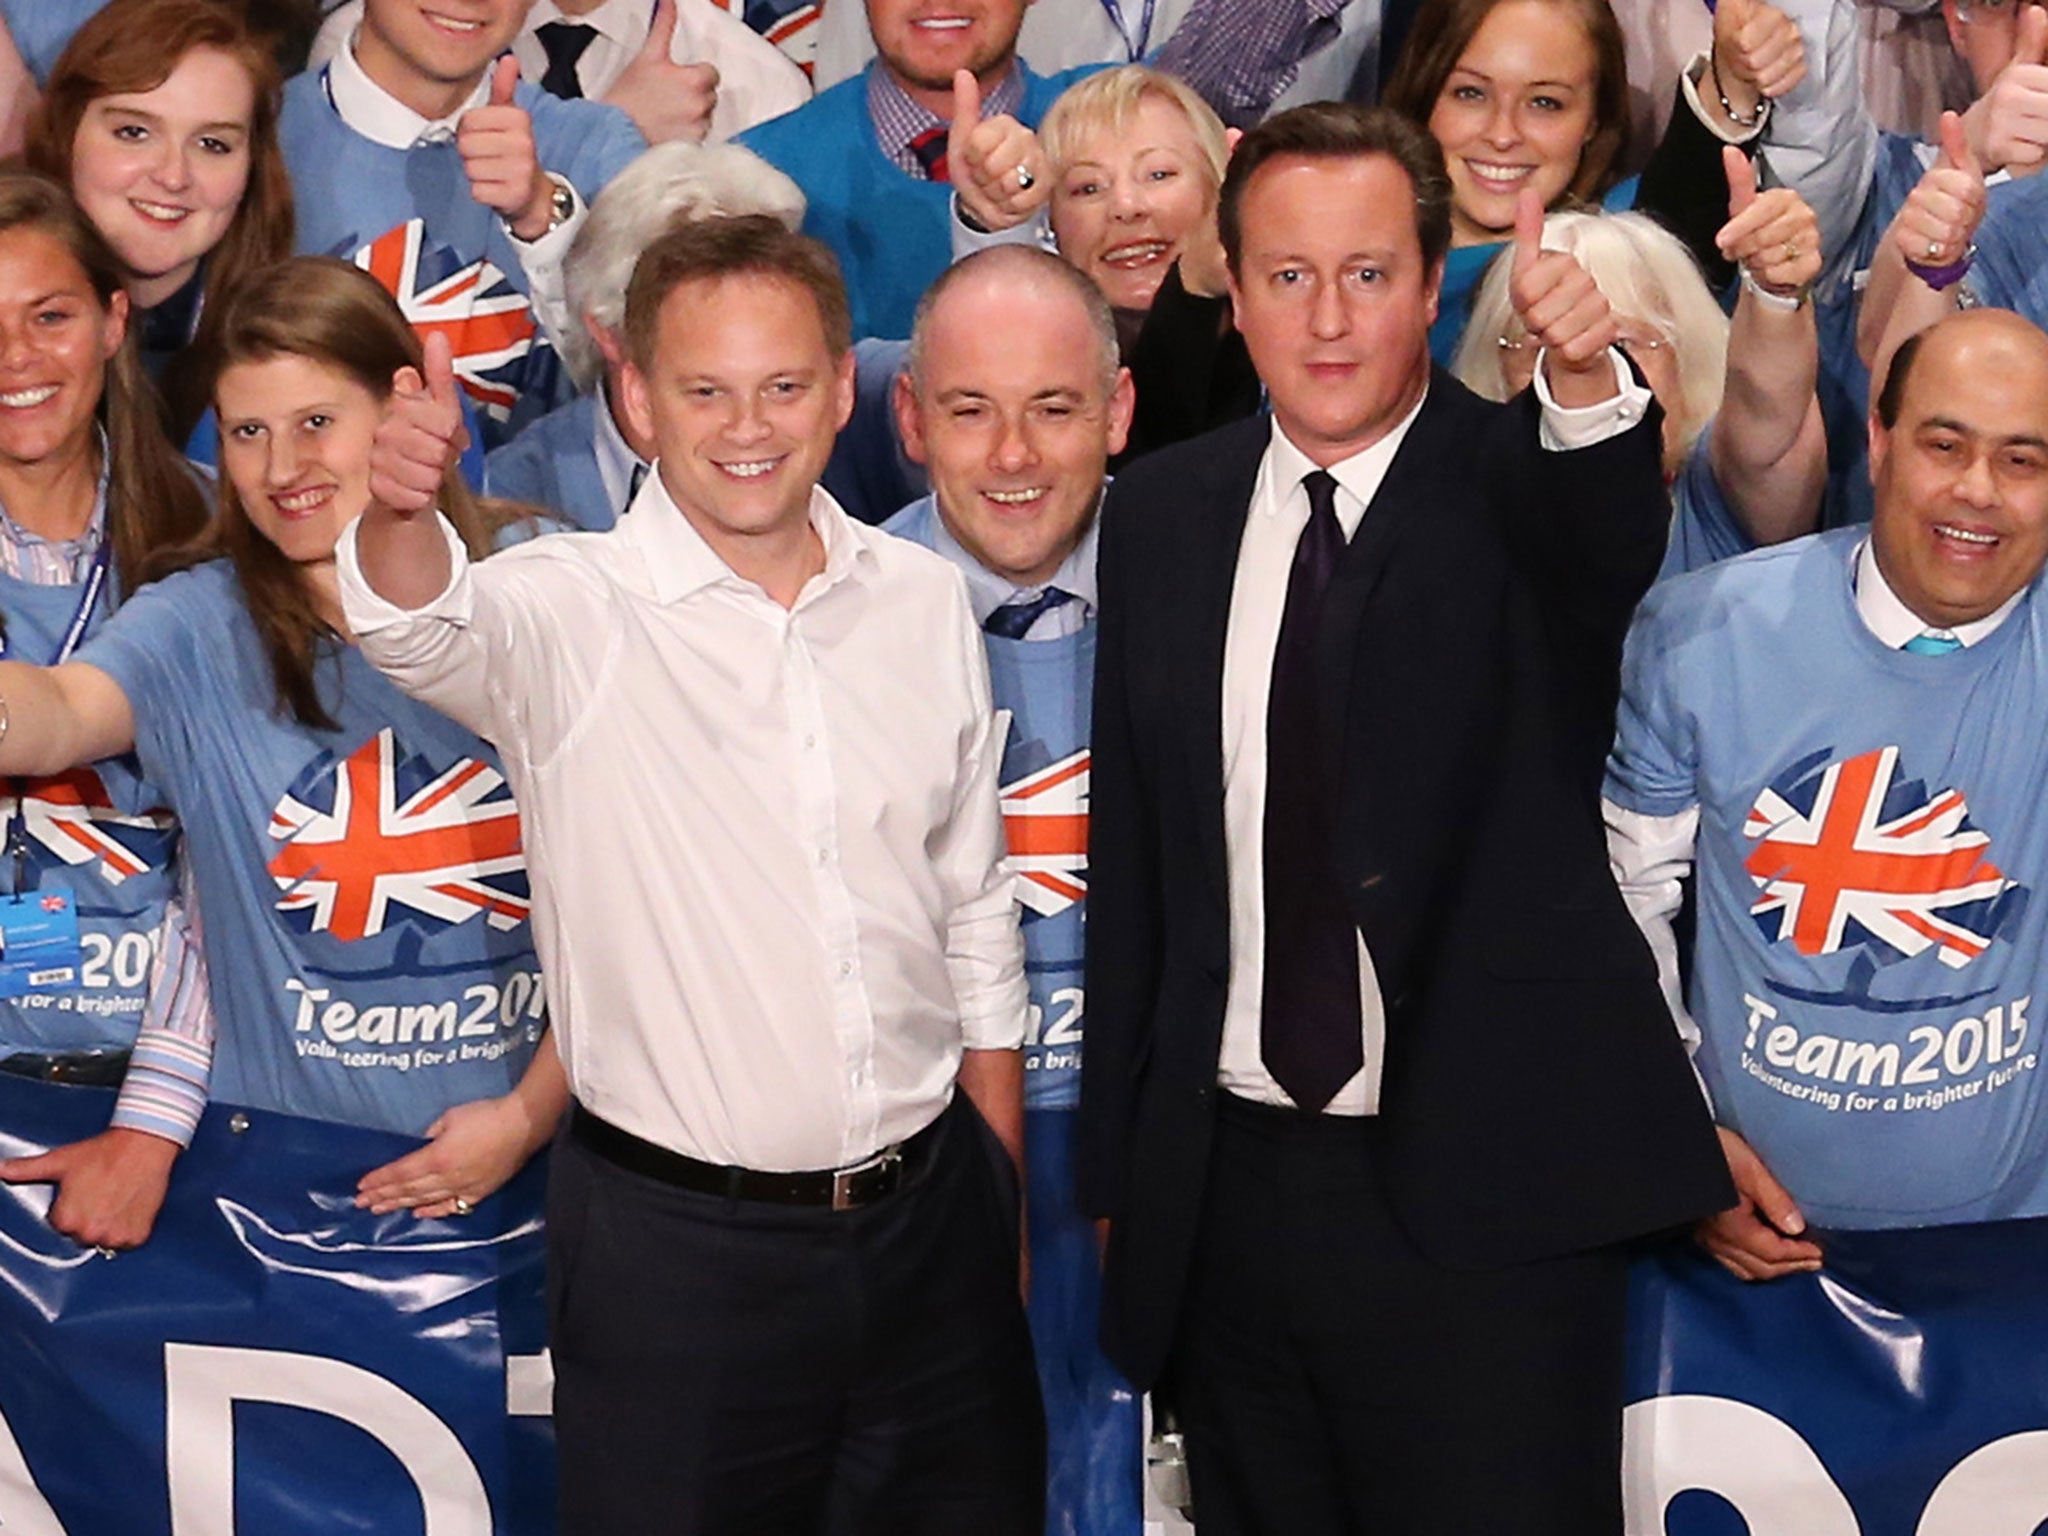 David Cameron and Grant Shapps at the 2014 Conservative party conference.